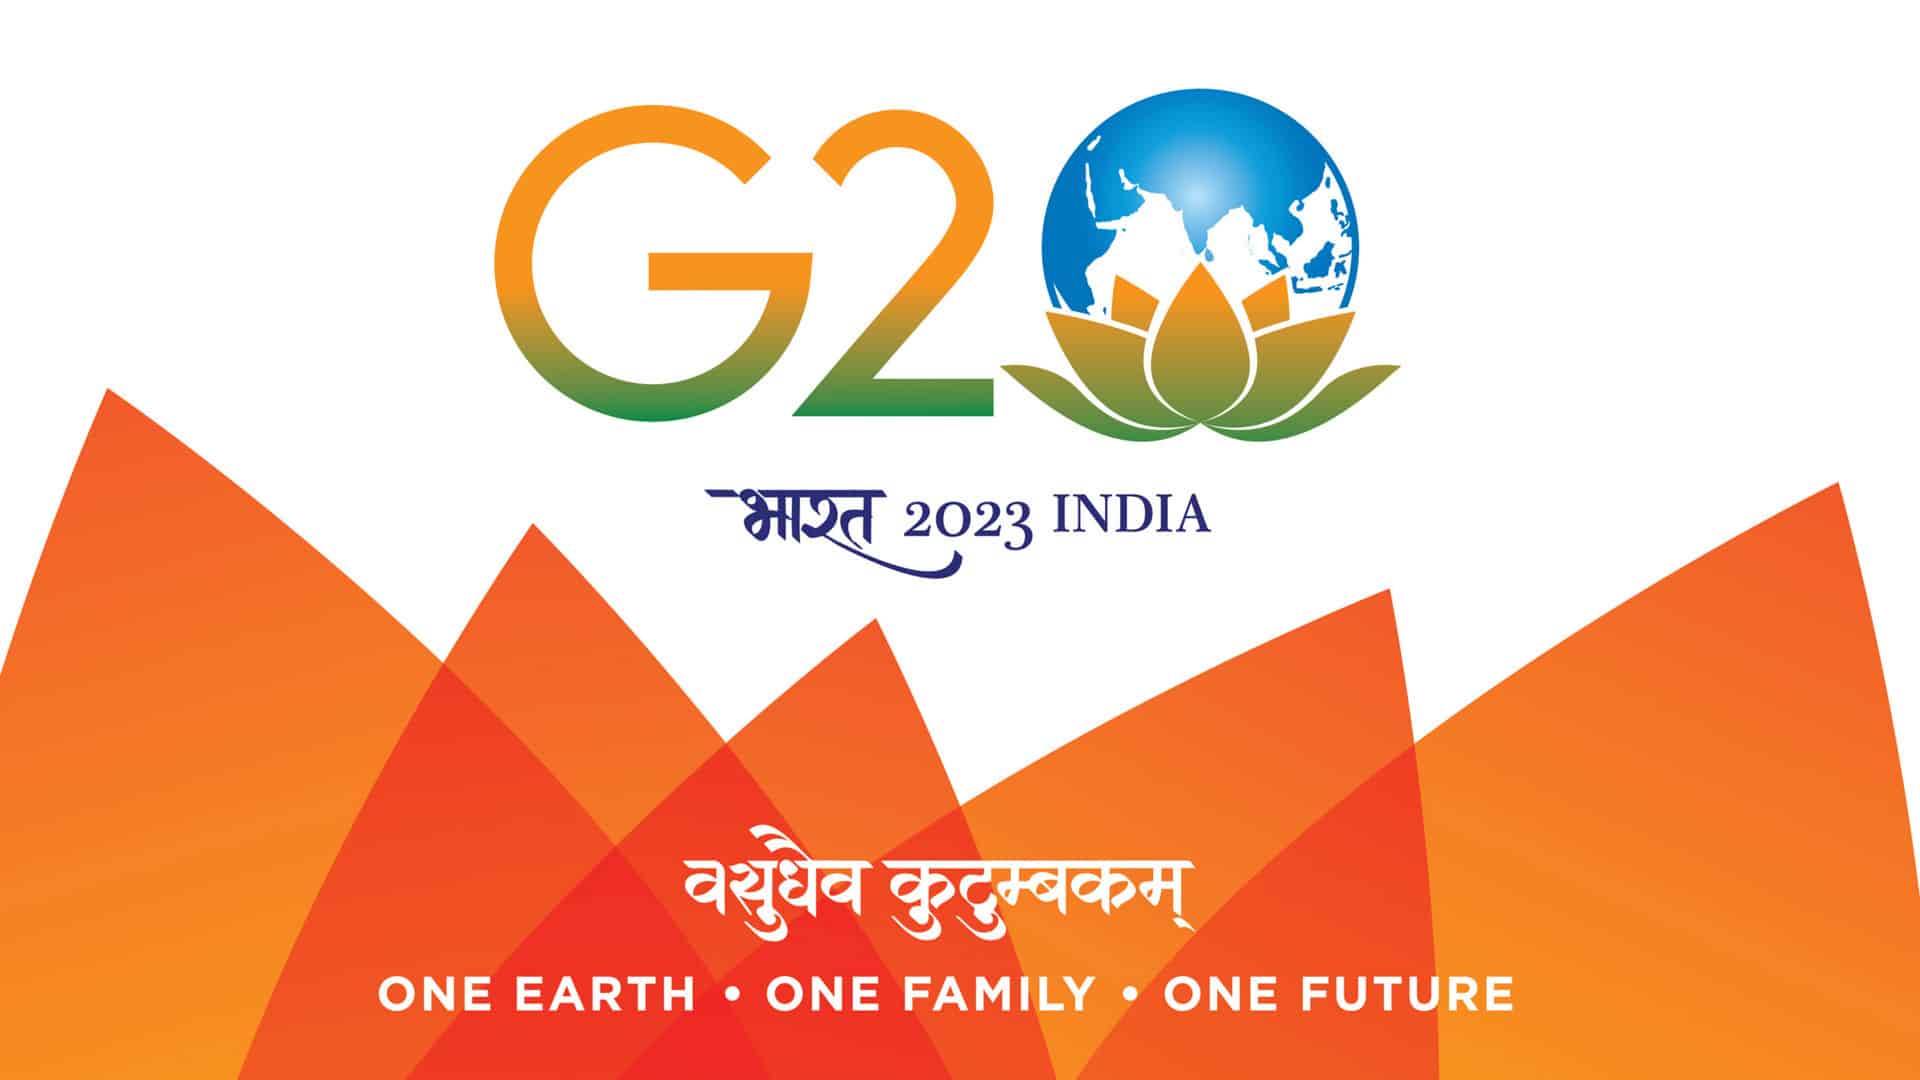 India's G20 presidency has given voice to Global South, says High Commissioner Doraiswami